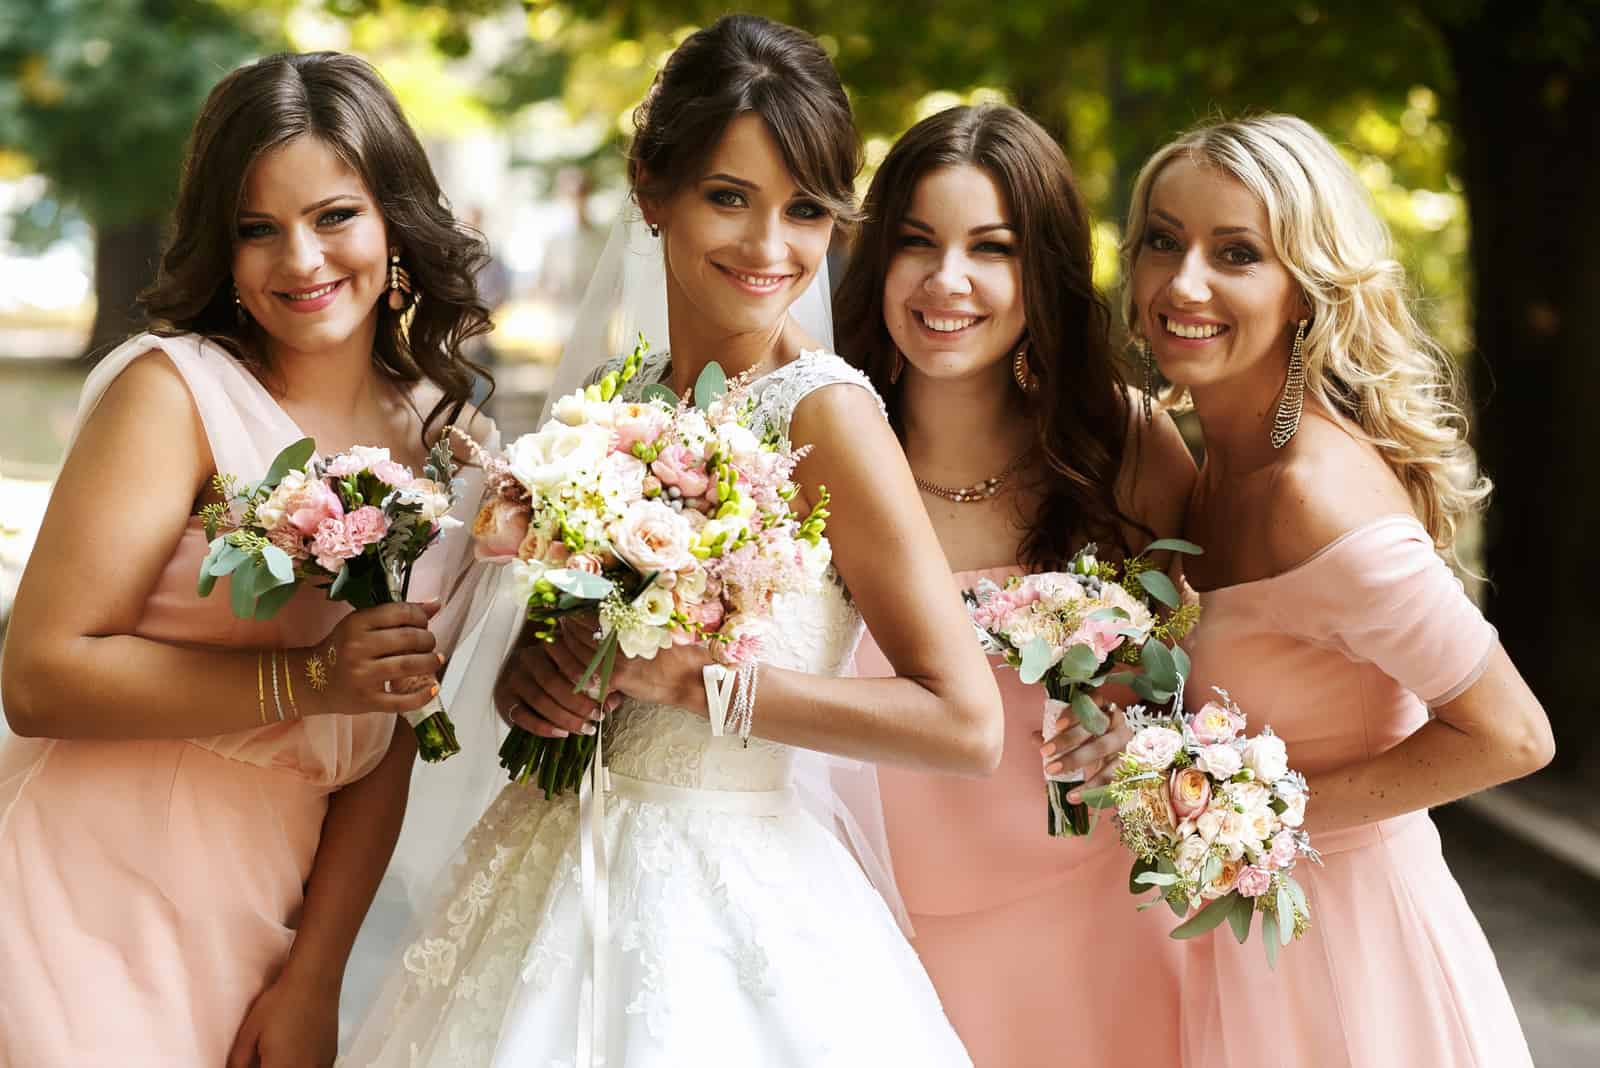 80 Beautiful Bride Quotes For Every Bride's Special Day